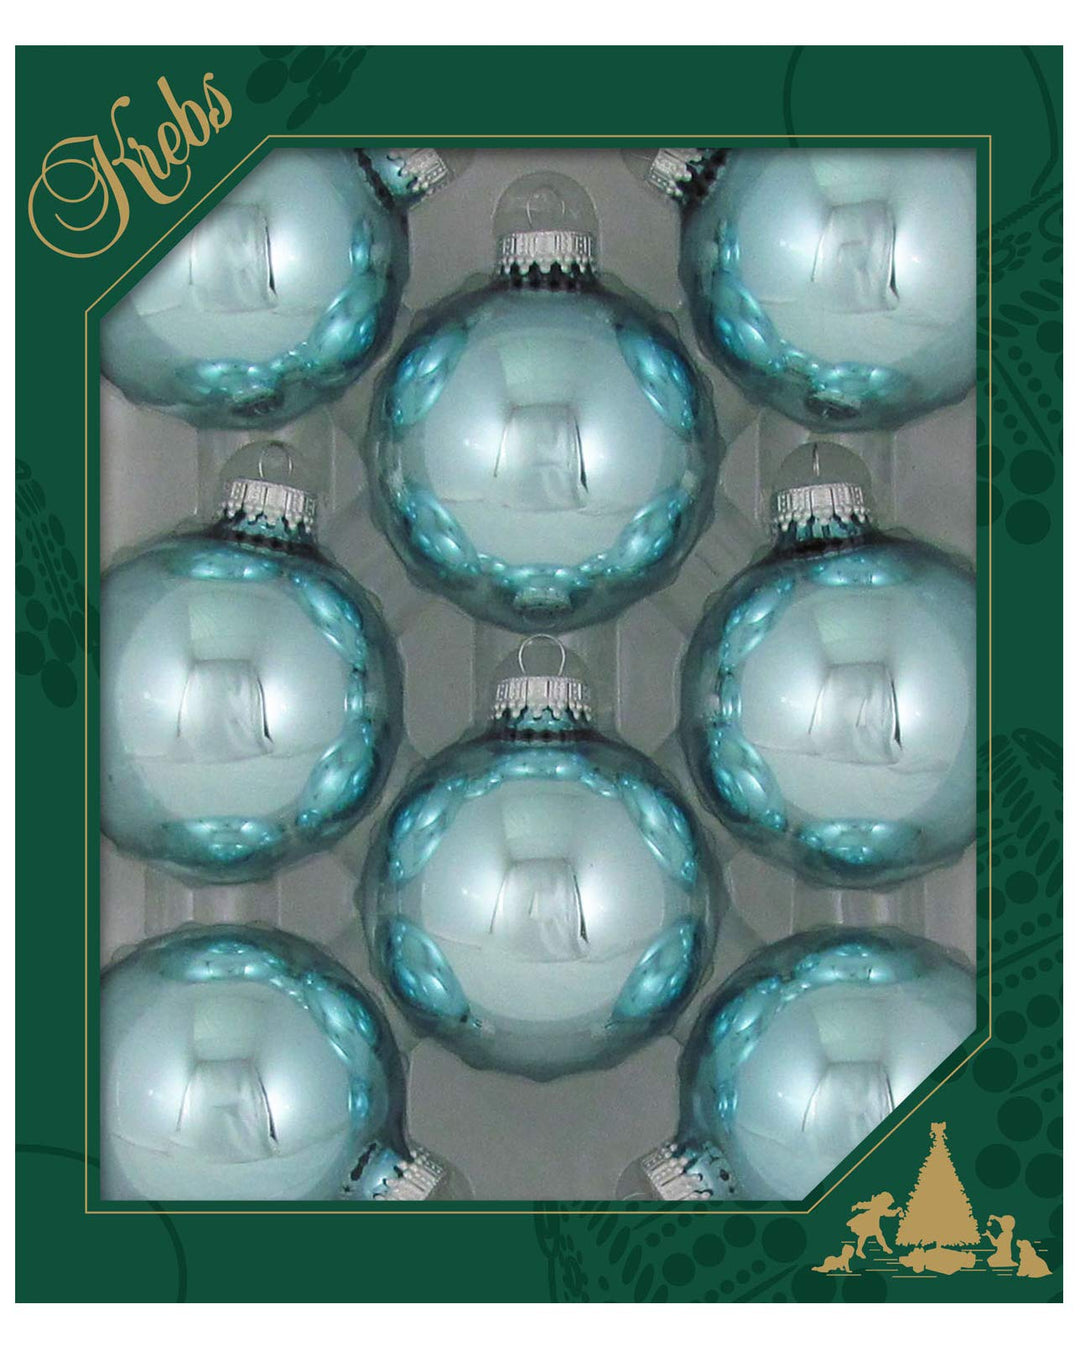 Christmas Tree Ornaments - 67mm / 2.625" [8 Pieces] Designer Glass Baubles from Christmas By Krebs - Handcrafted Seamless Hanging Holiday Decor for Trees (Shiny Starlight Blue)